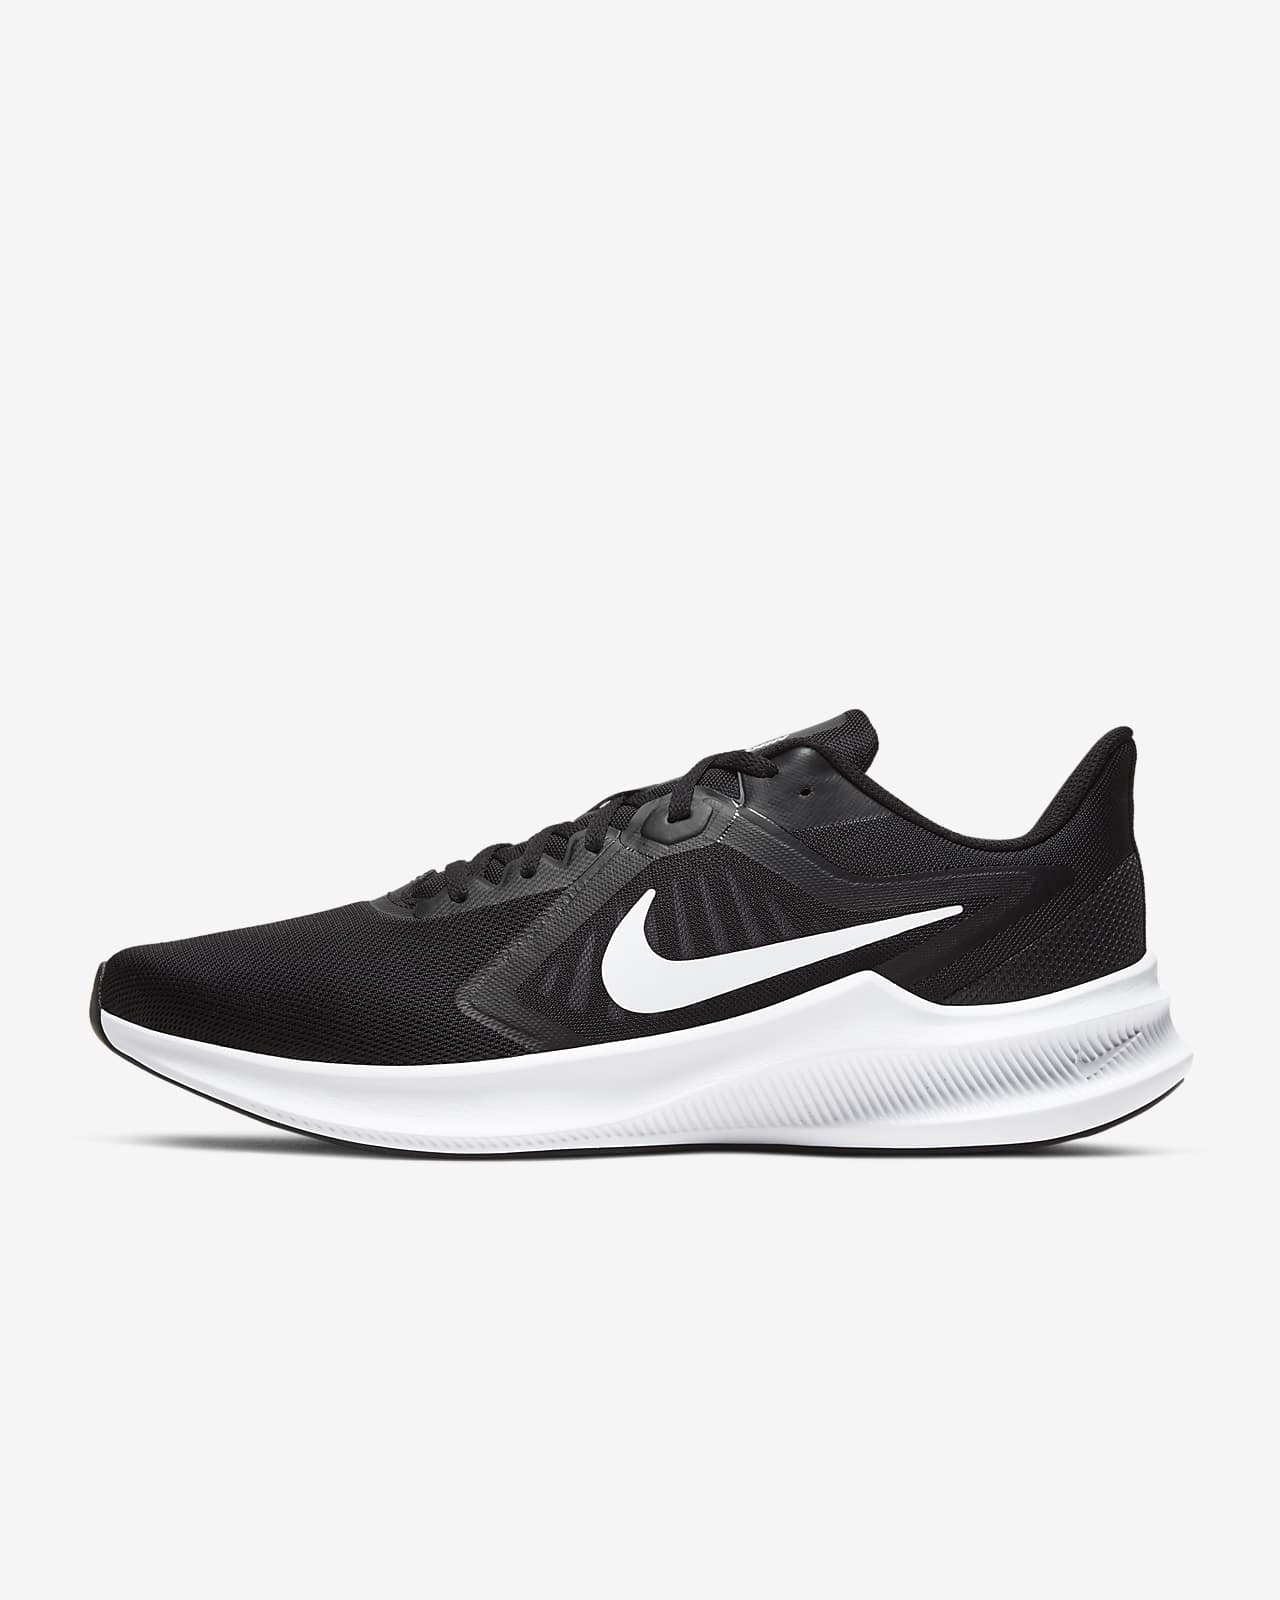 are nike downshifter good for running